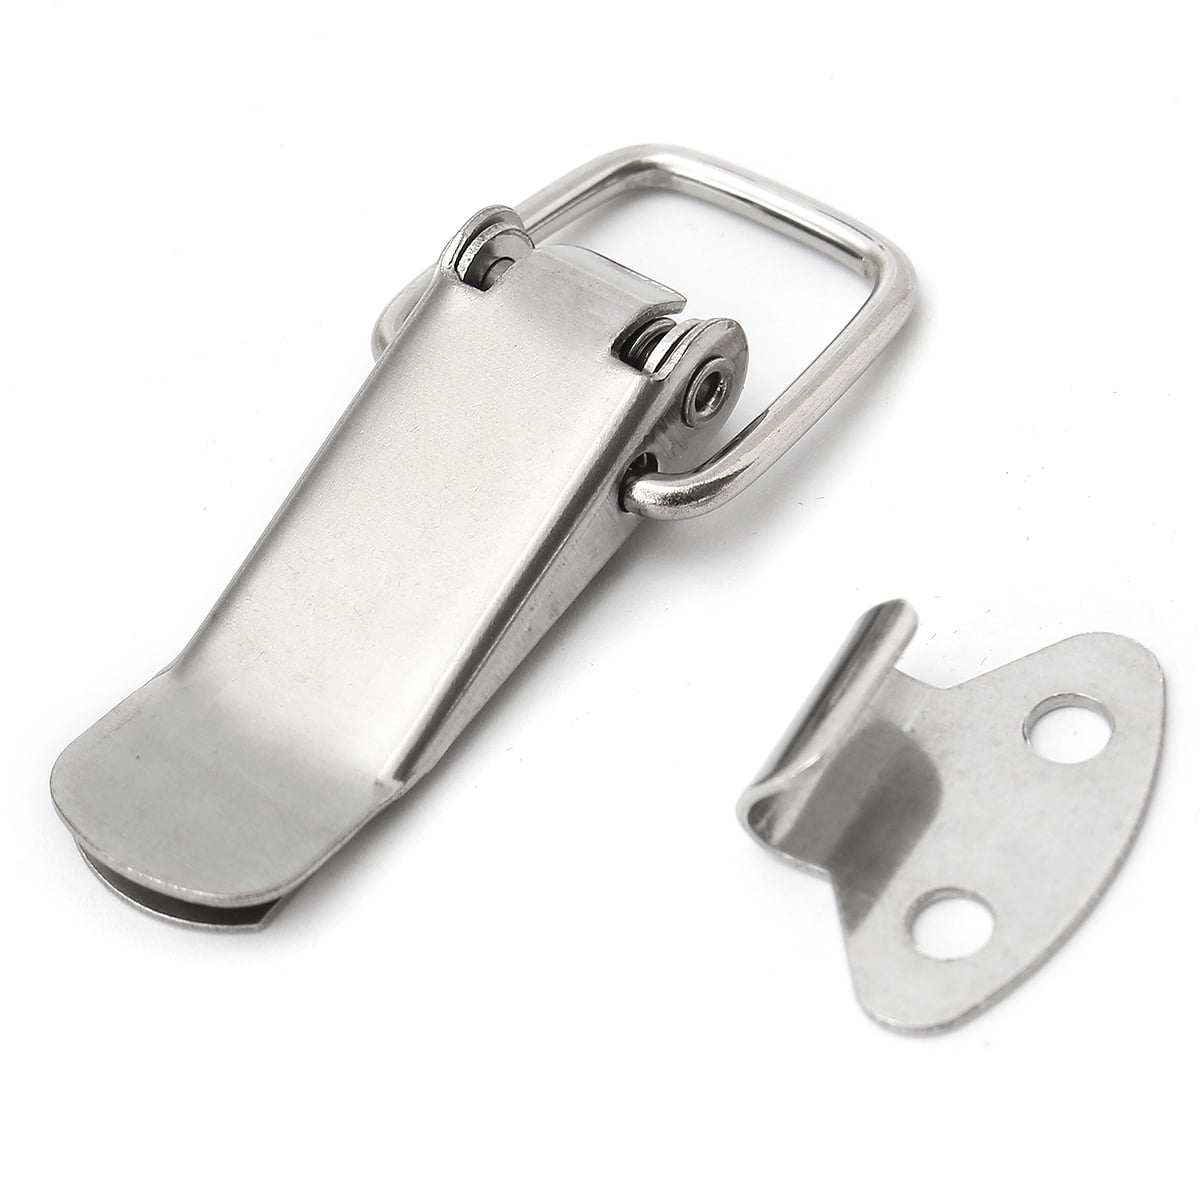 Generic 4 Set Stainless Spring Loaded Toggle Case Box Chest Trunk Latch Catch Clamp Clip